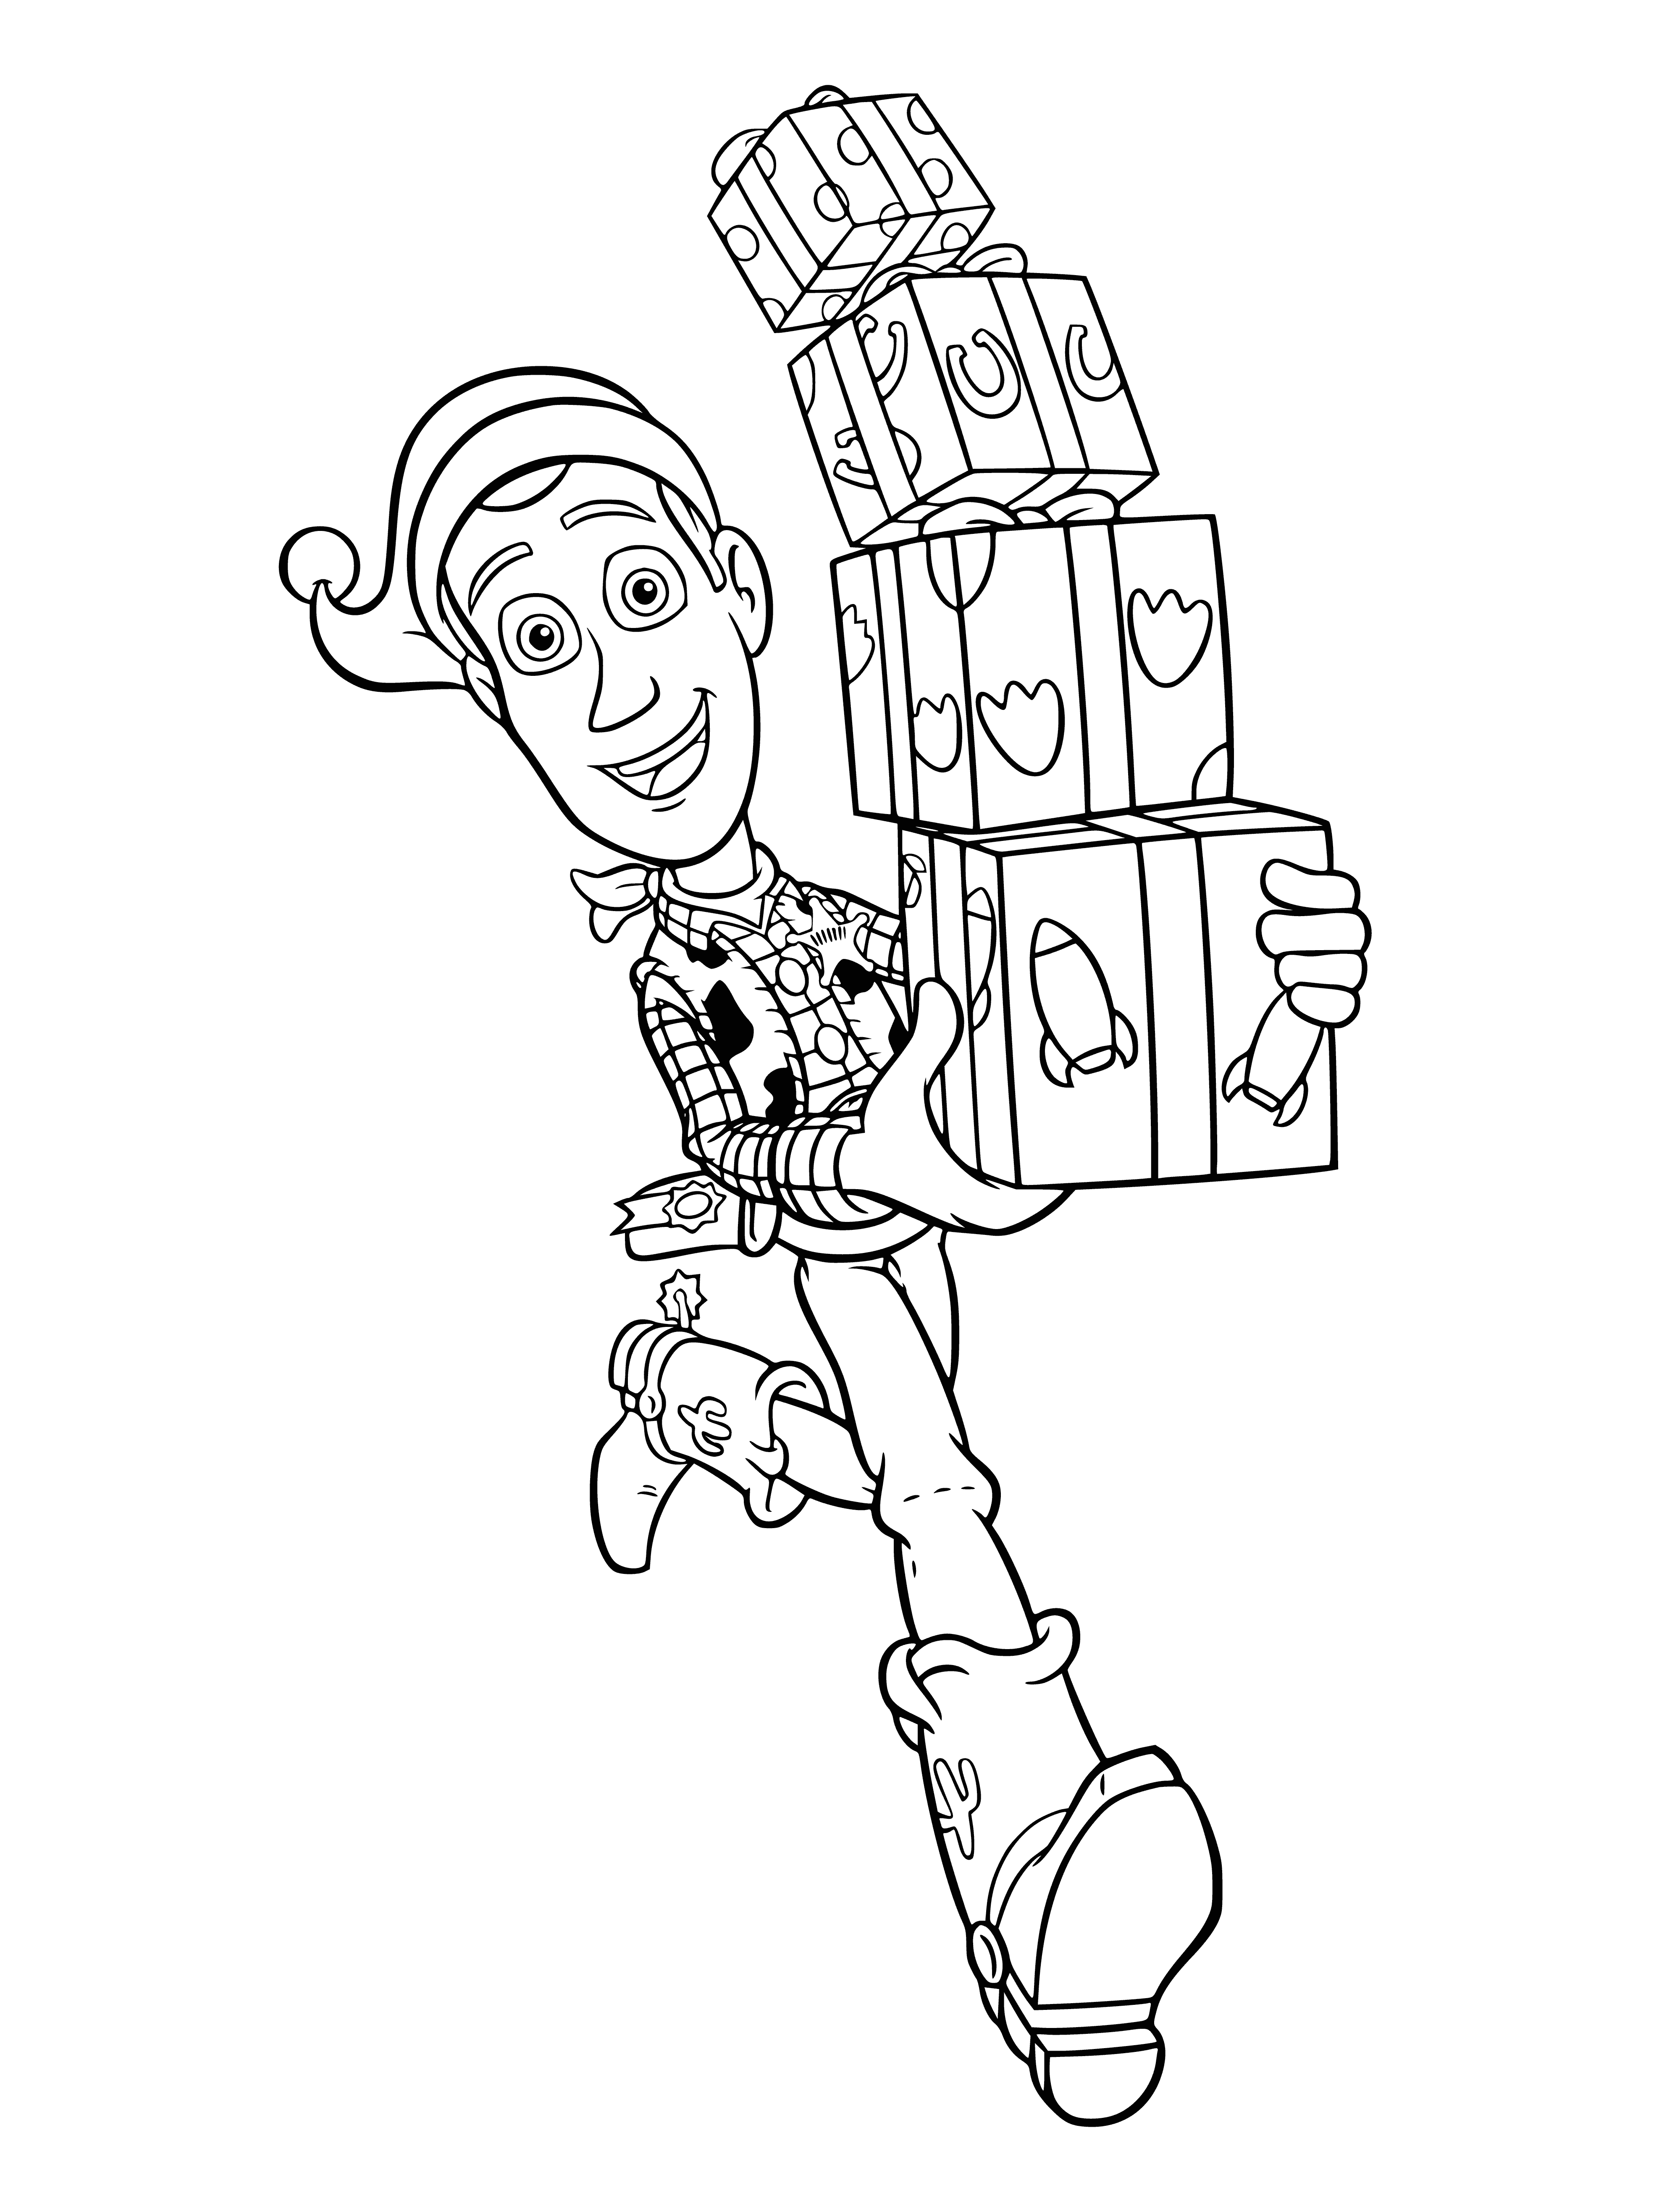 coloring page: Woody is excitedly ready to celebrate the new year with gifts, confetti, and a big smile! #NewYear #Happy